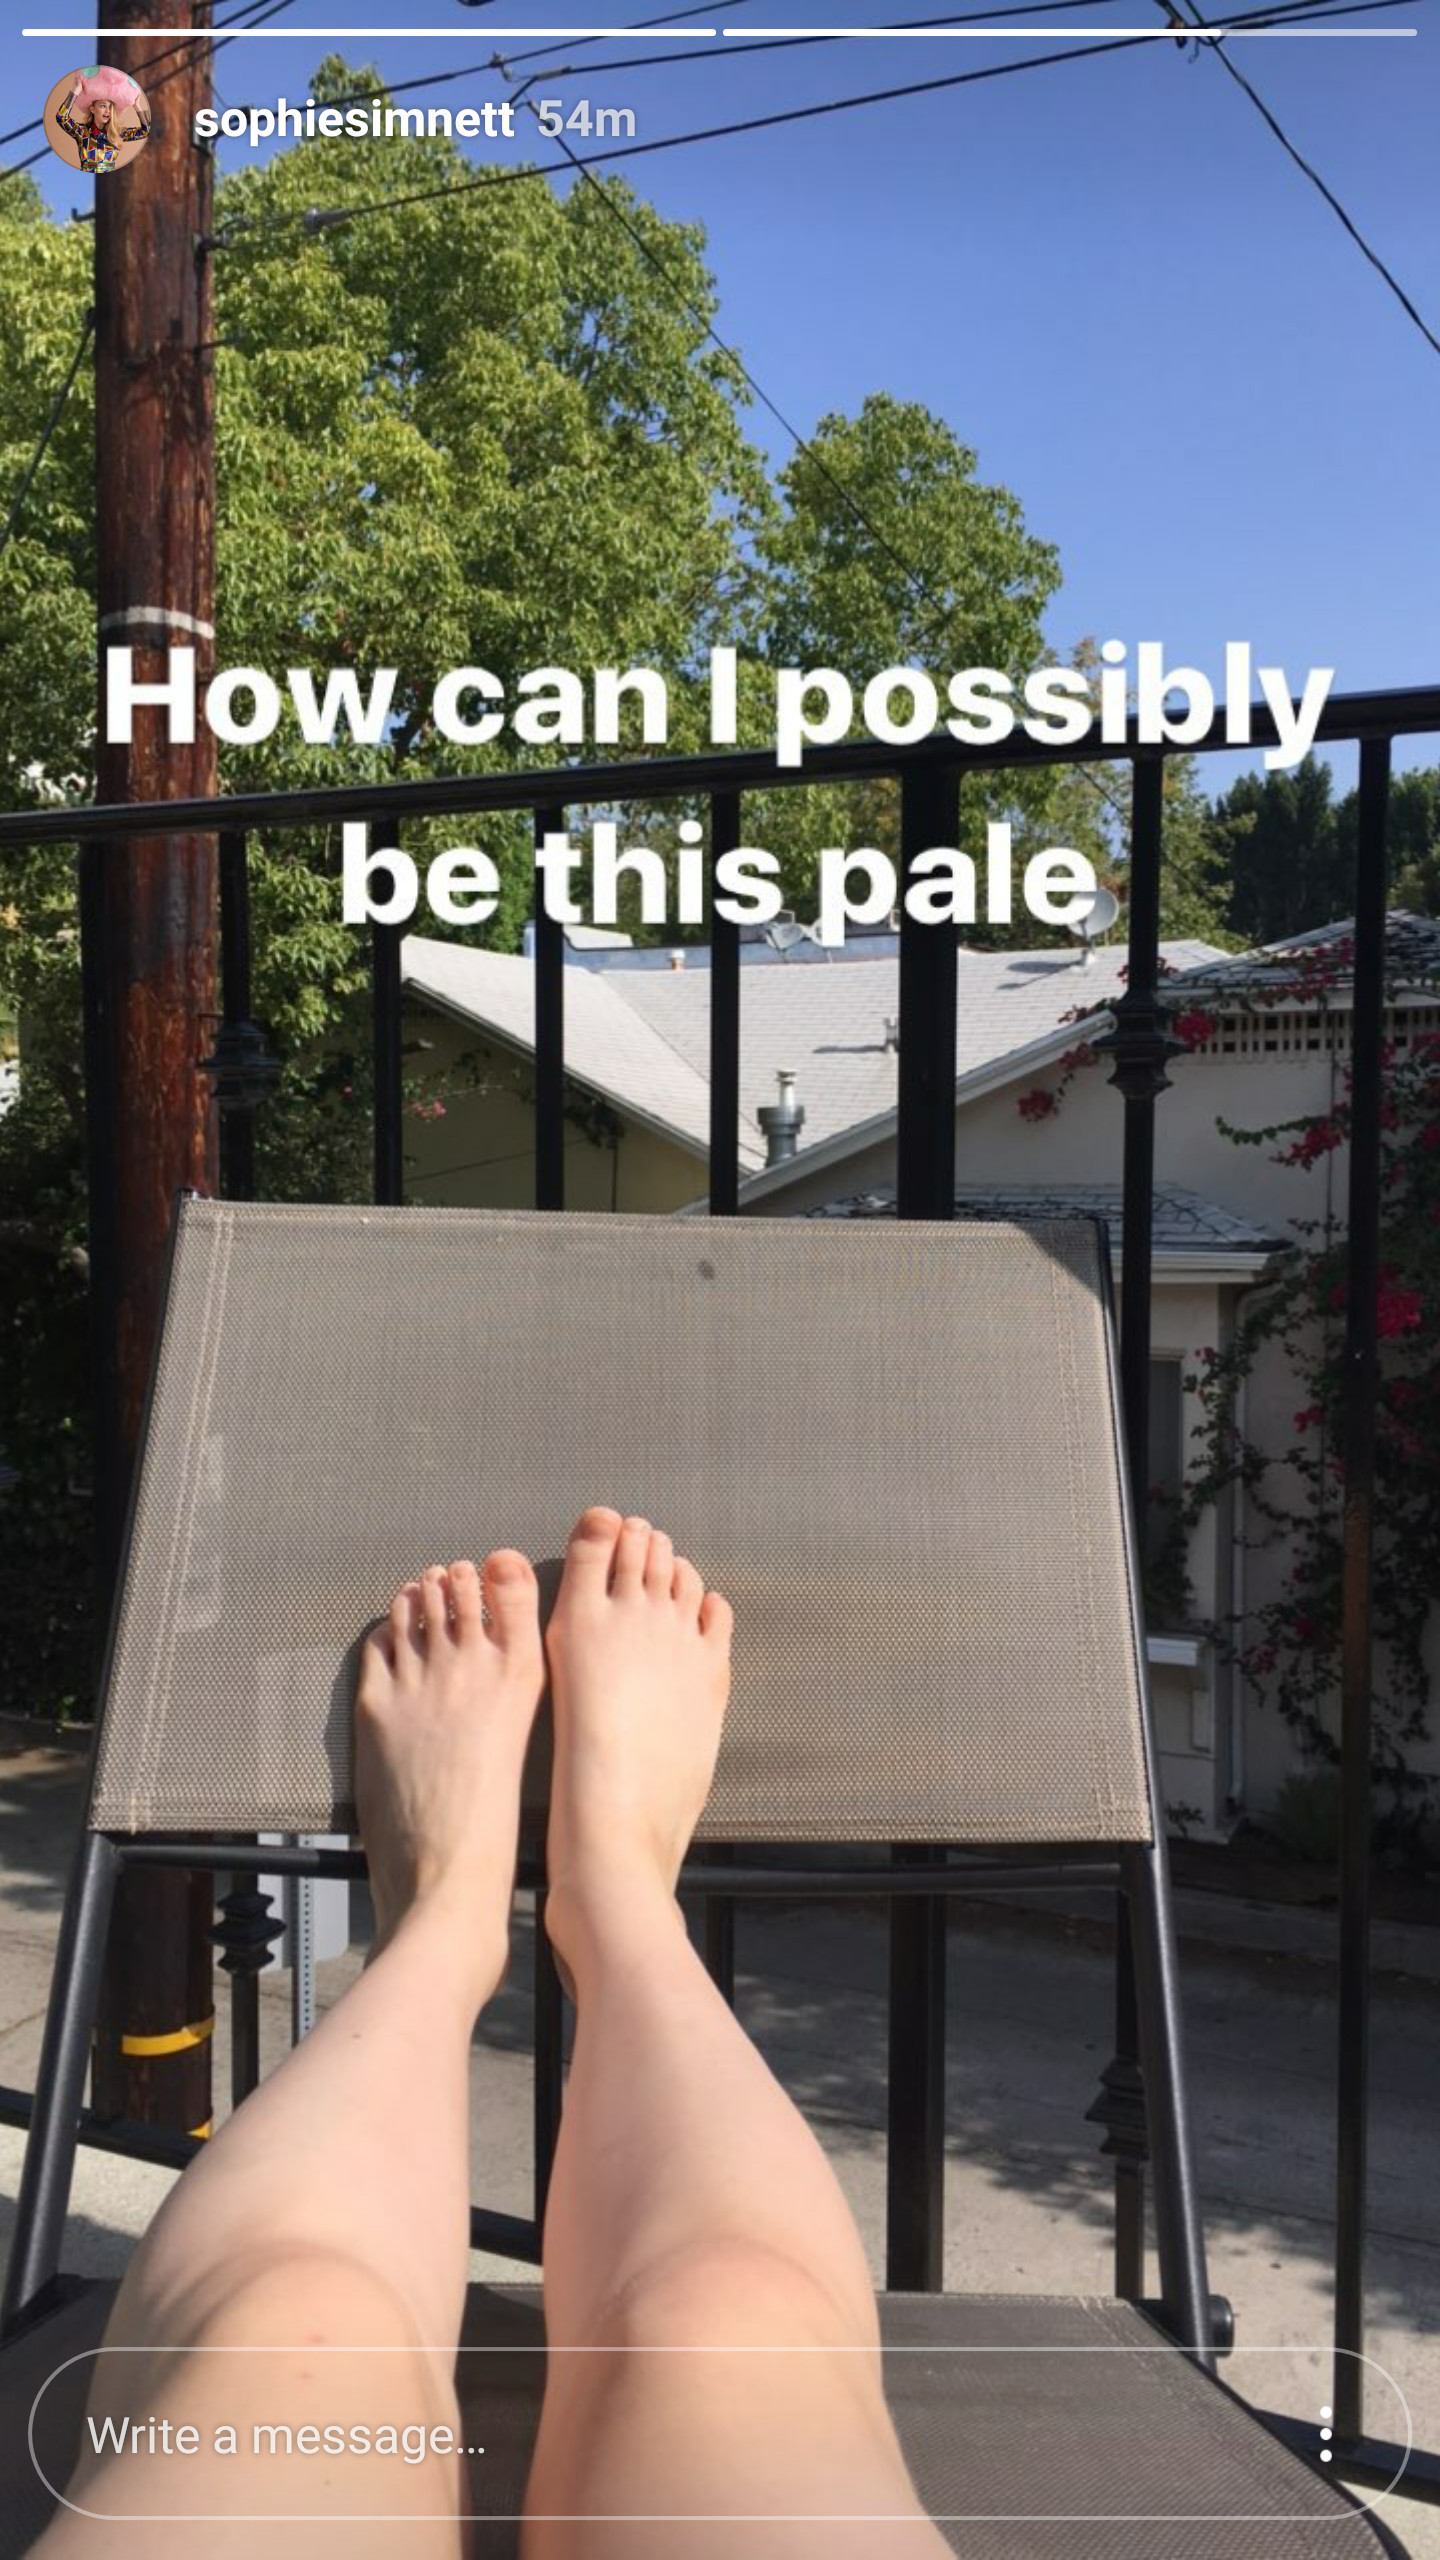 People who liked Sophie Simnett's feet, also liked.